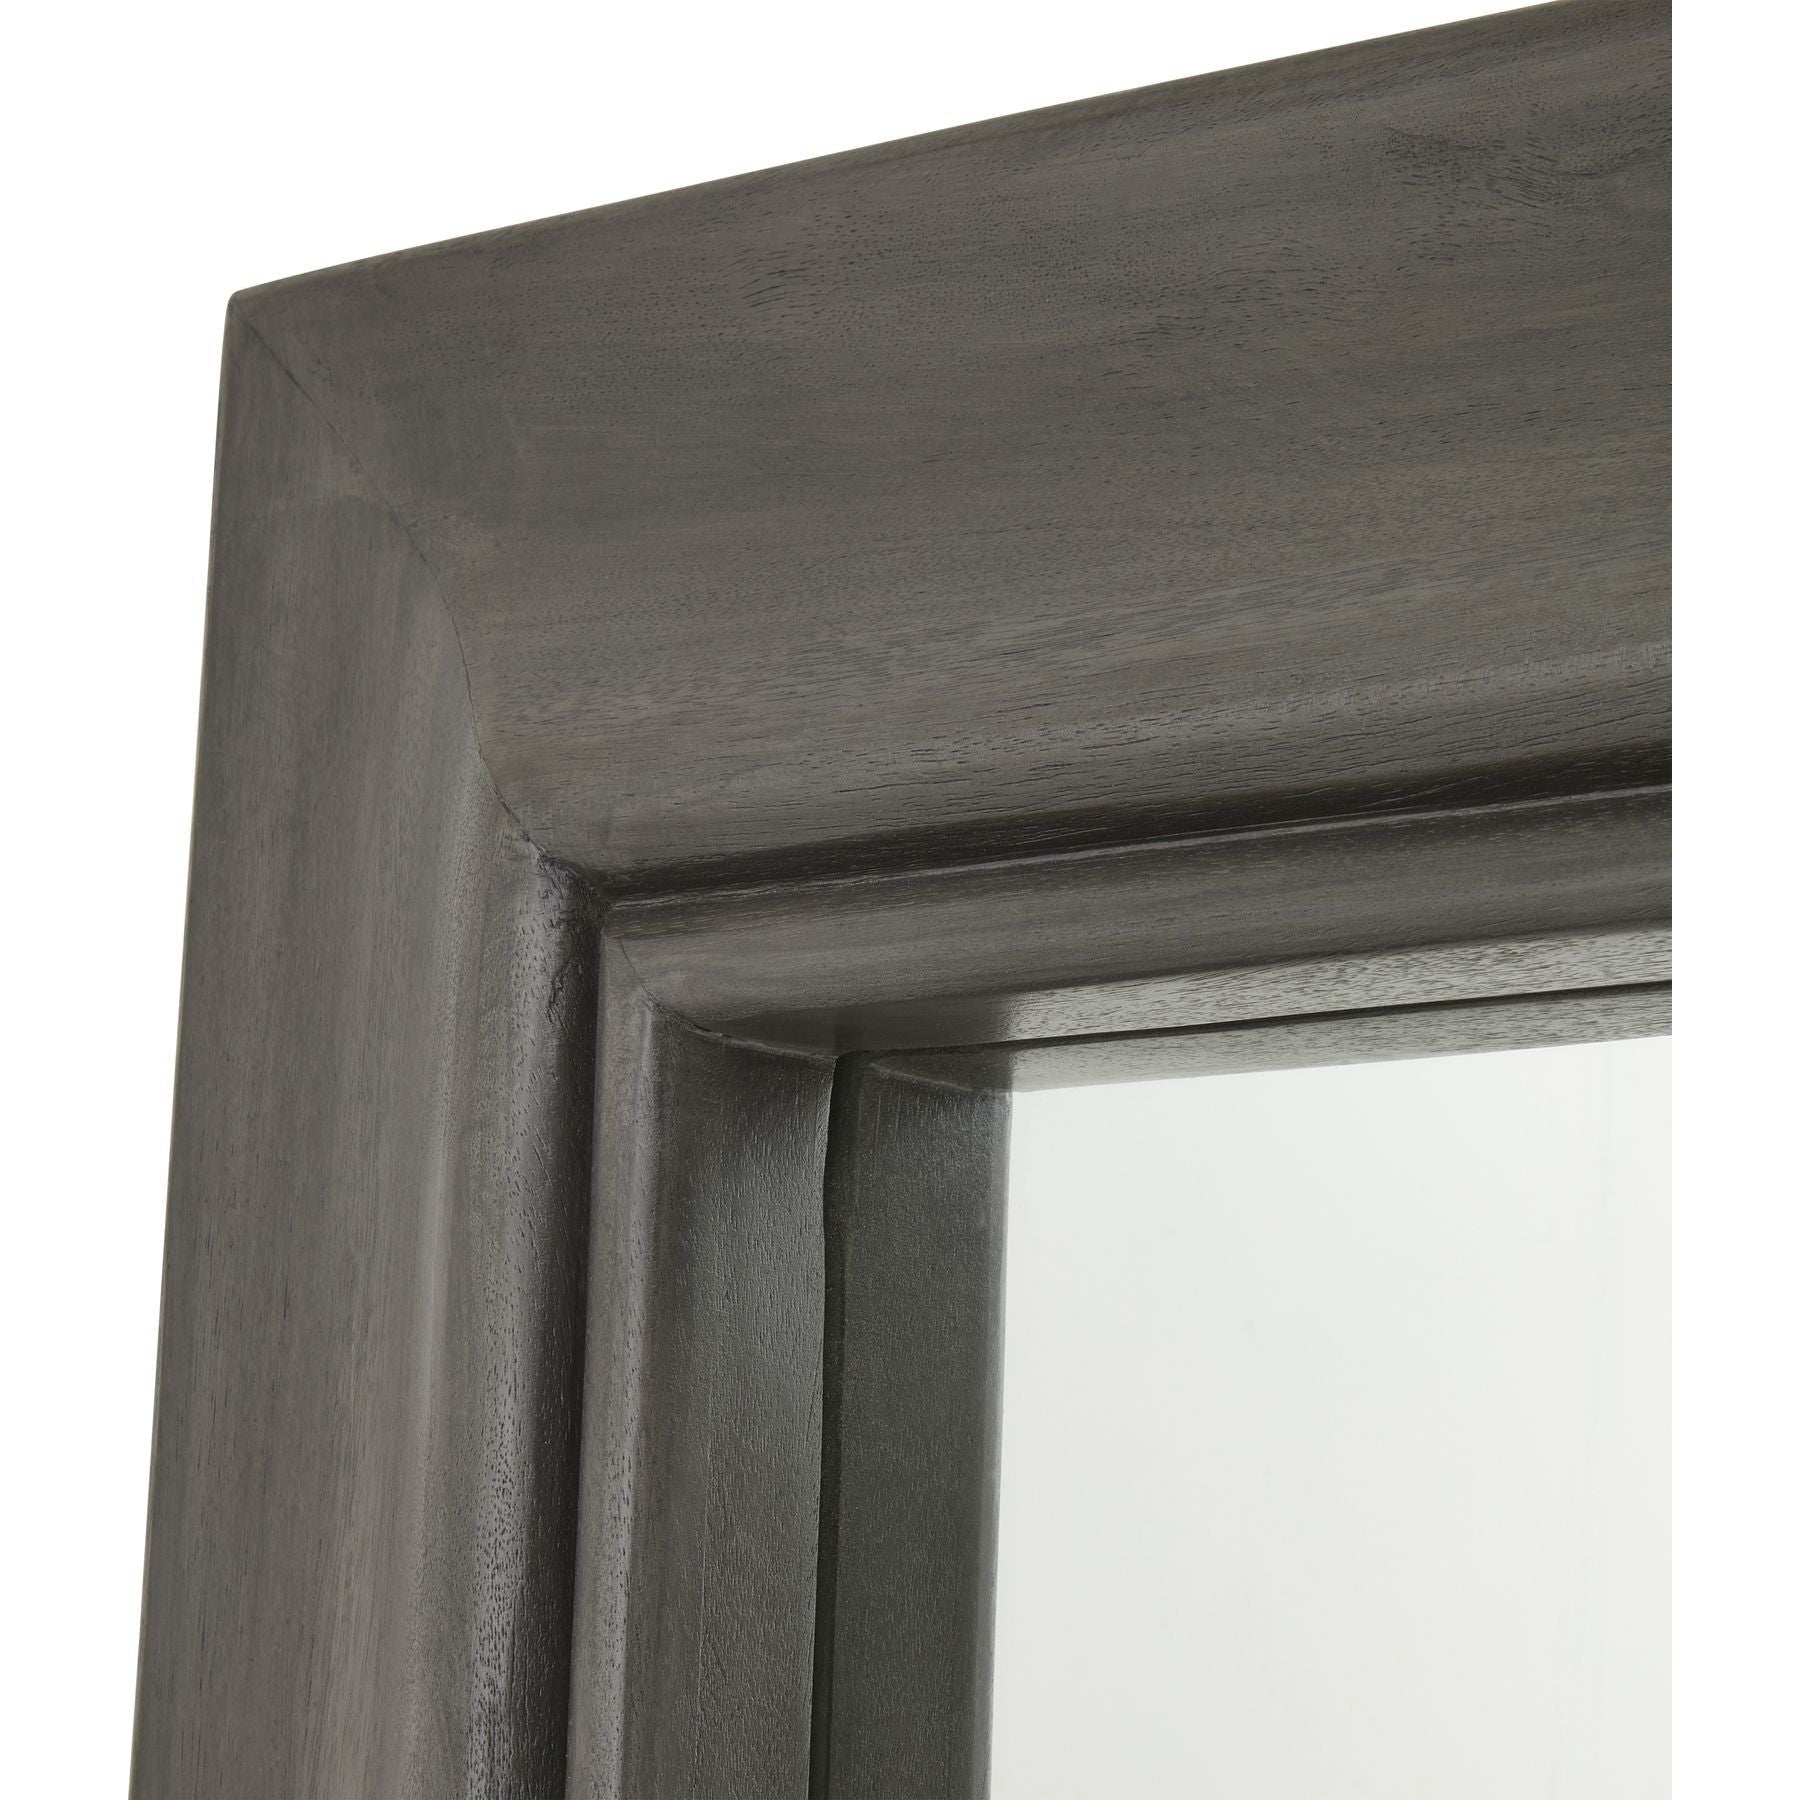 Lucia Collection Large Mirror - Ashton and Finch